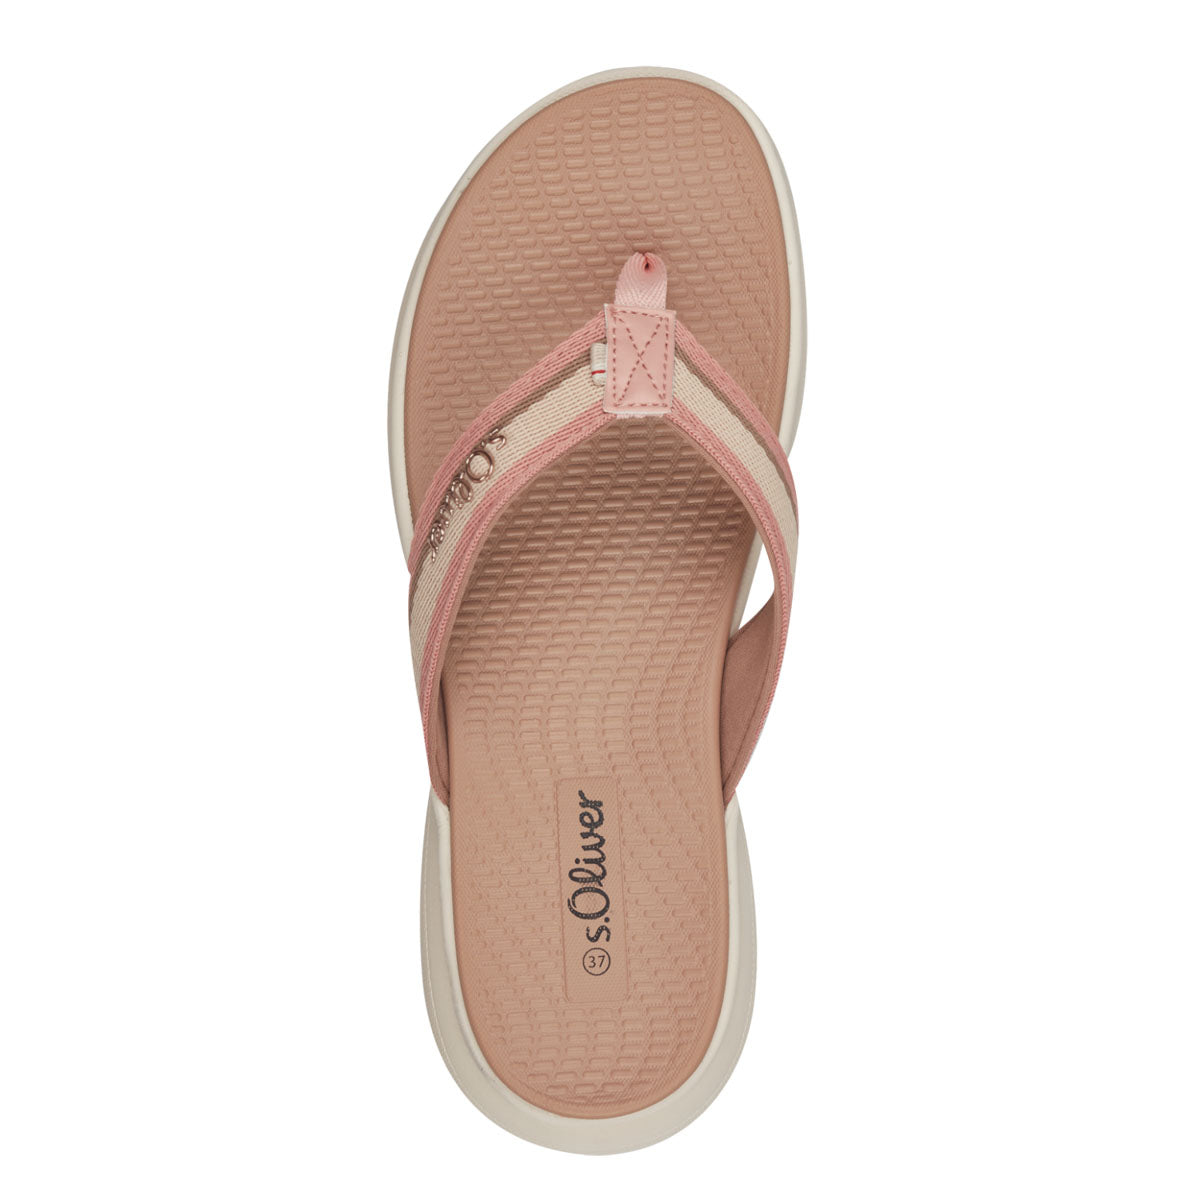 Top view of s.Oliver rose pink sandals showing the rounded toe shape.